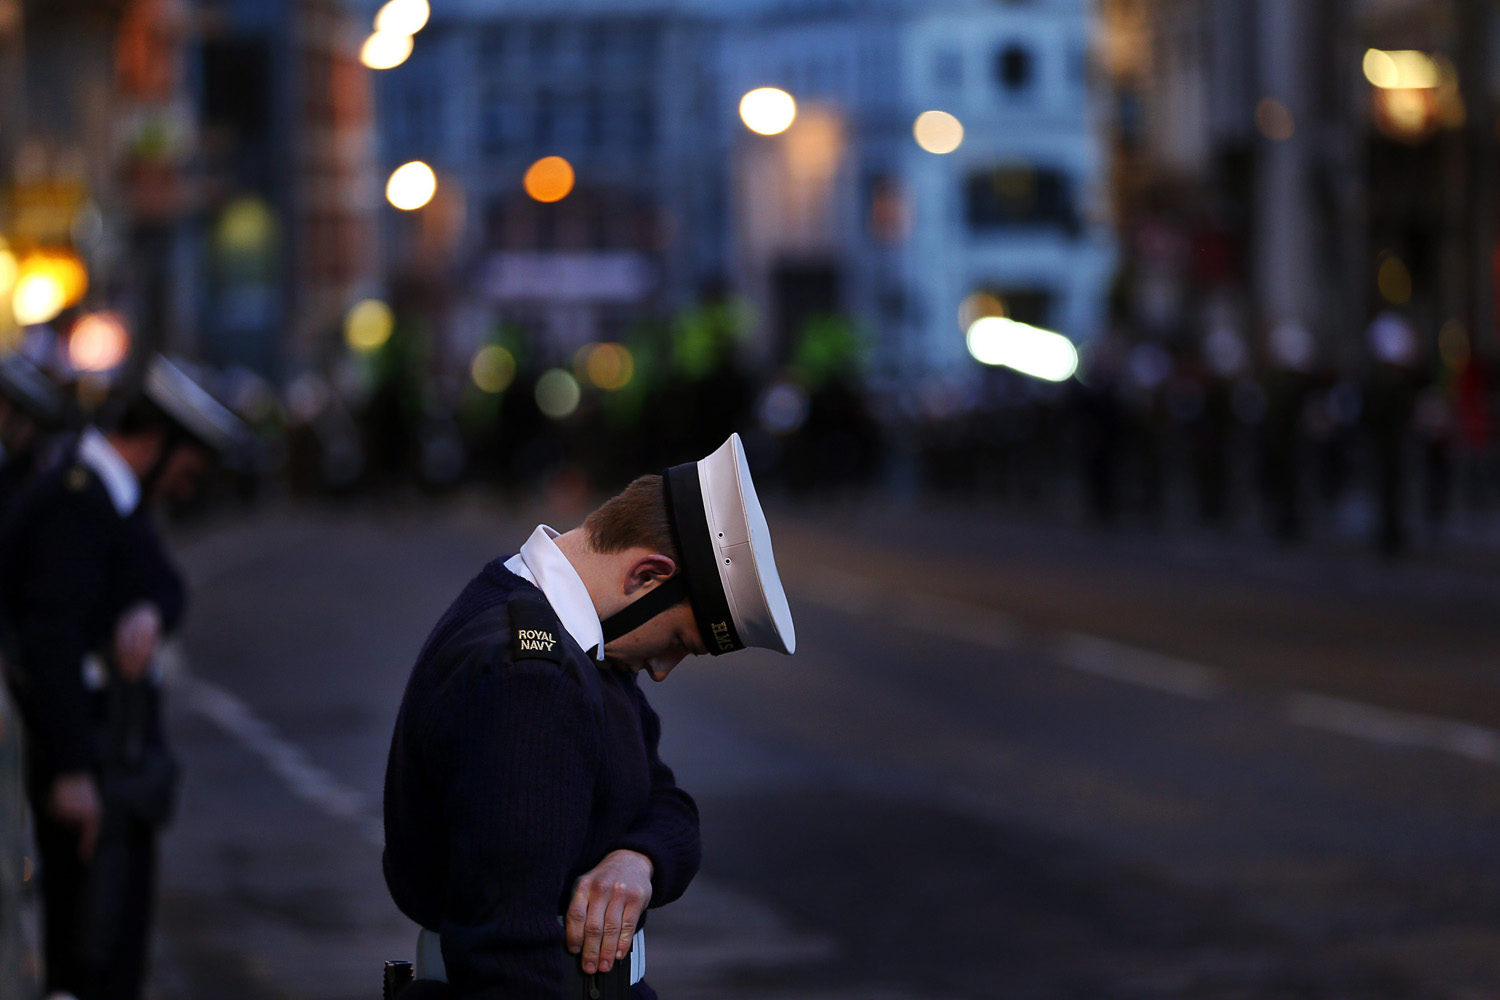 April 15, 2013. British members of the Royal Navy line a street during the rehearsal of former British Prime Minister Margaret Thatcher's funeral near St. Paul's Cathedral, in London.